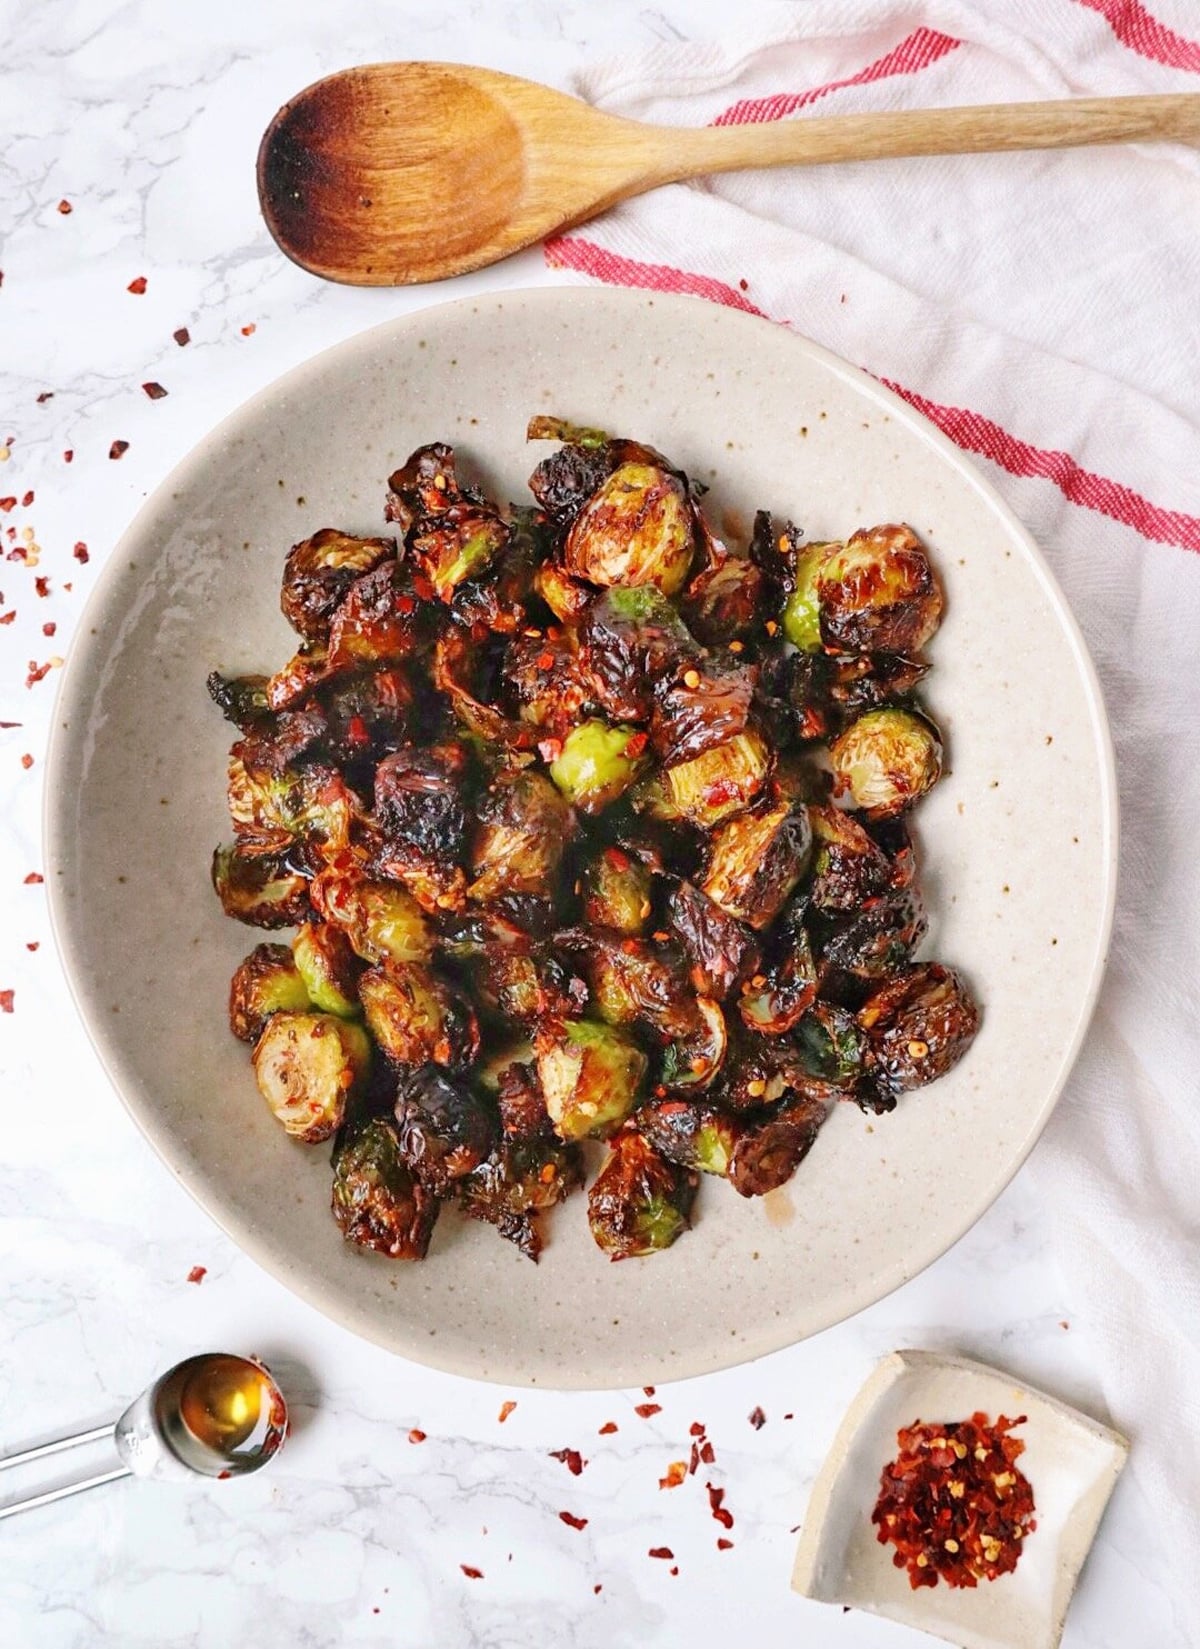 Honey balsamic glazed air fried brussels sprouts